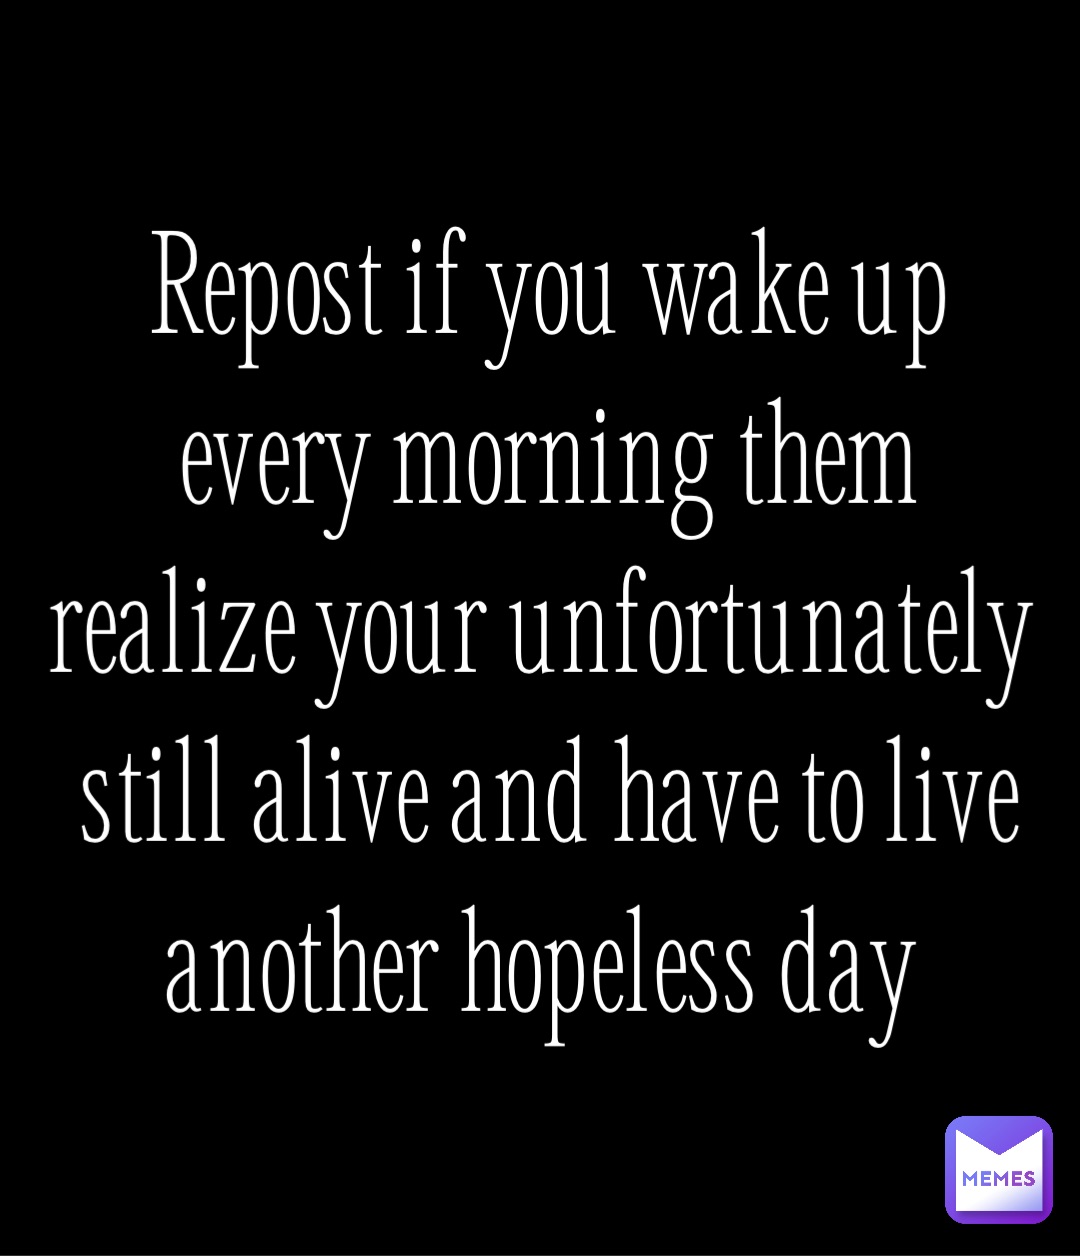 Repost if you wake up every morning them realize your unfortunately still alive and have to live another hopeless day